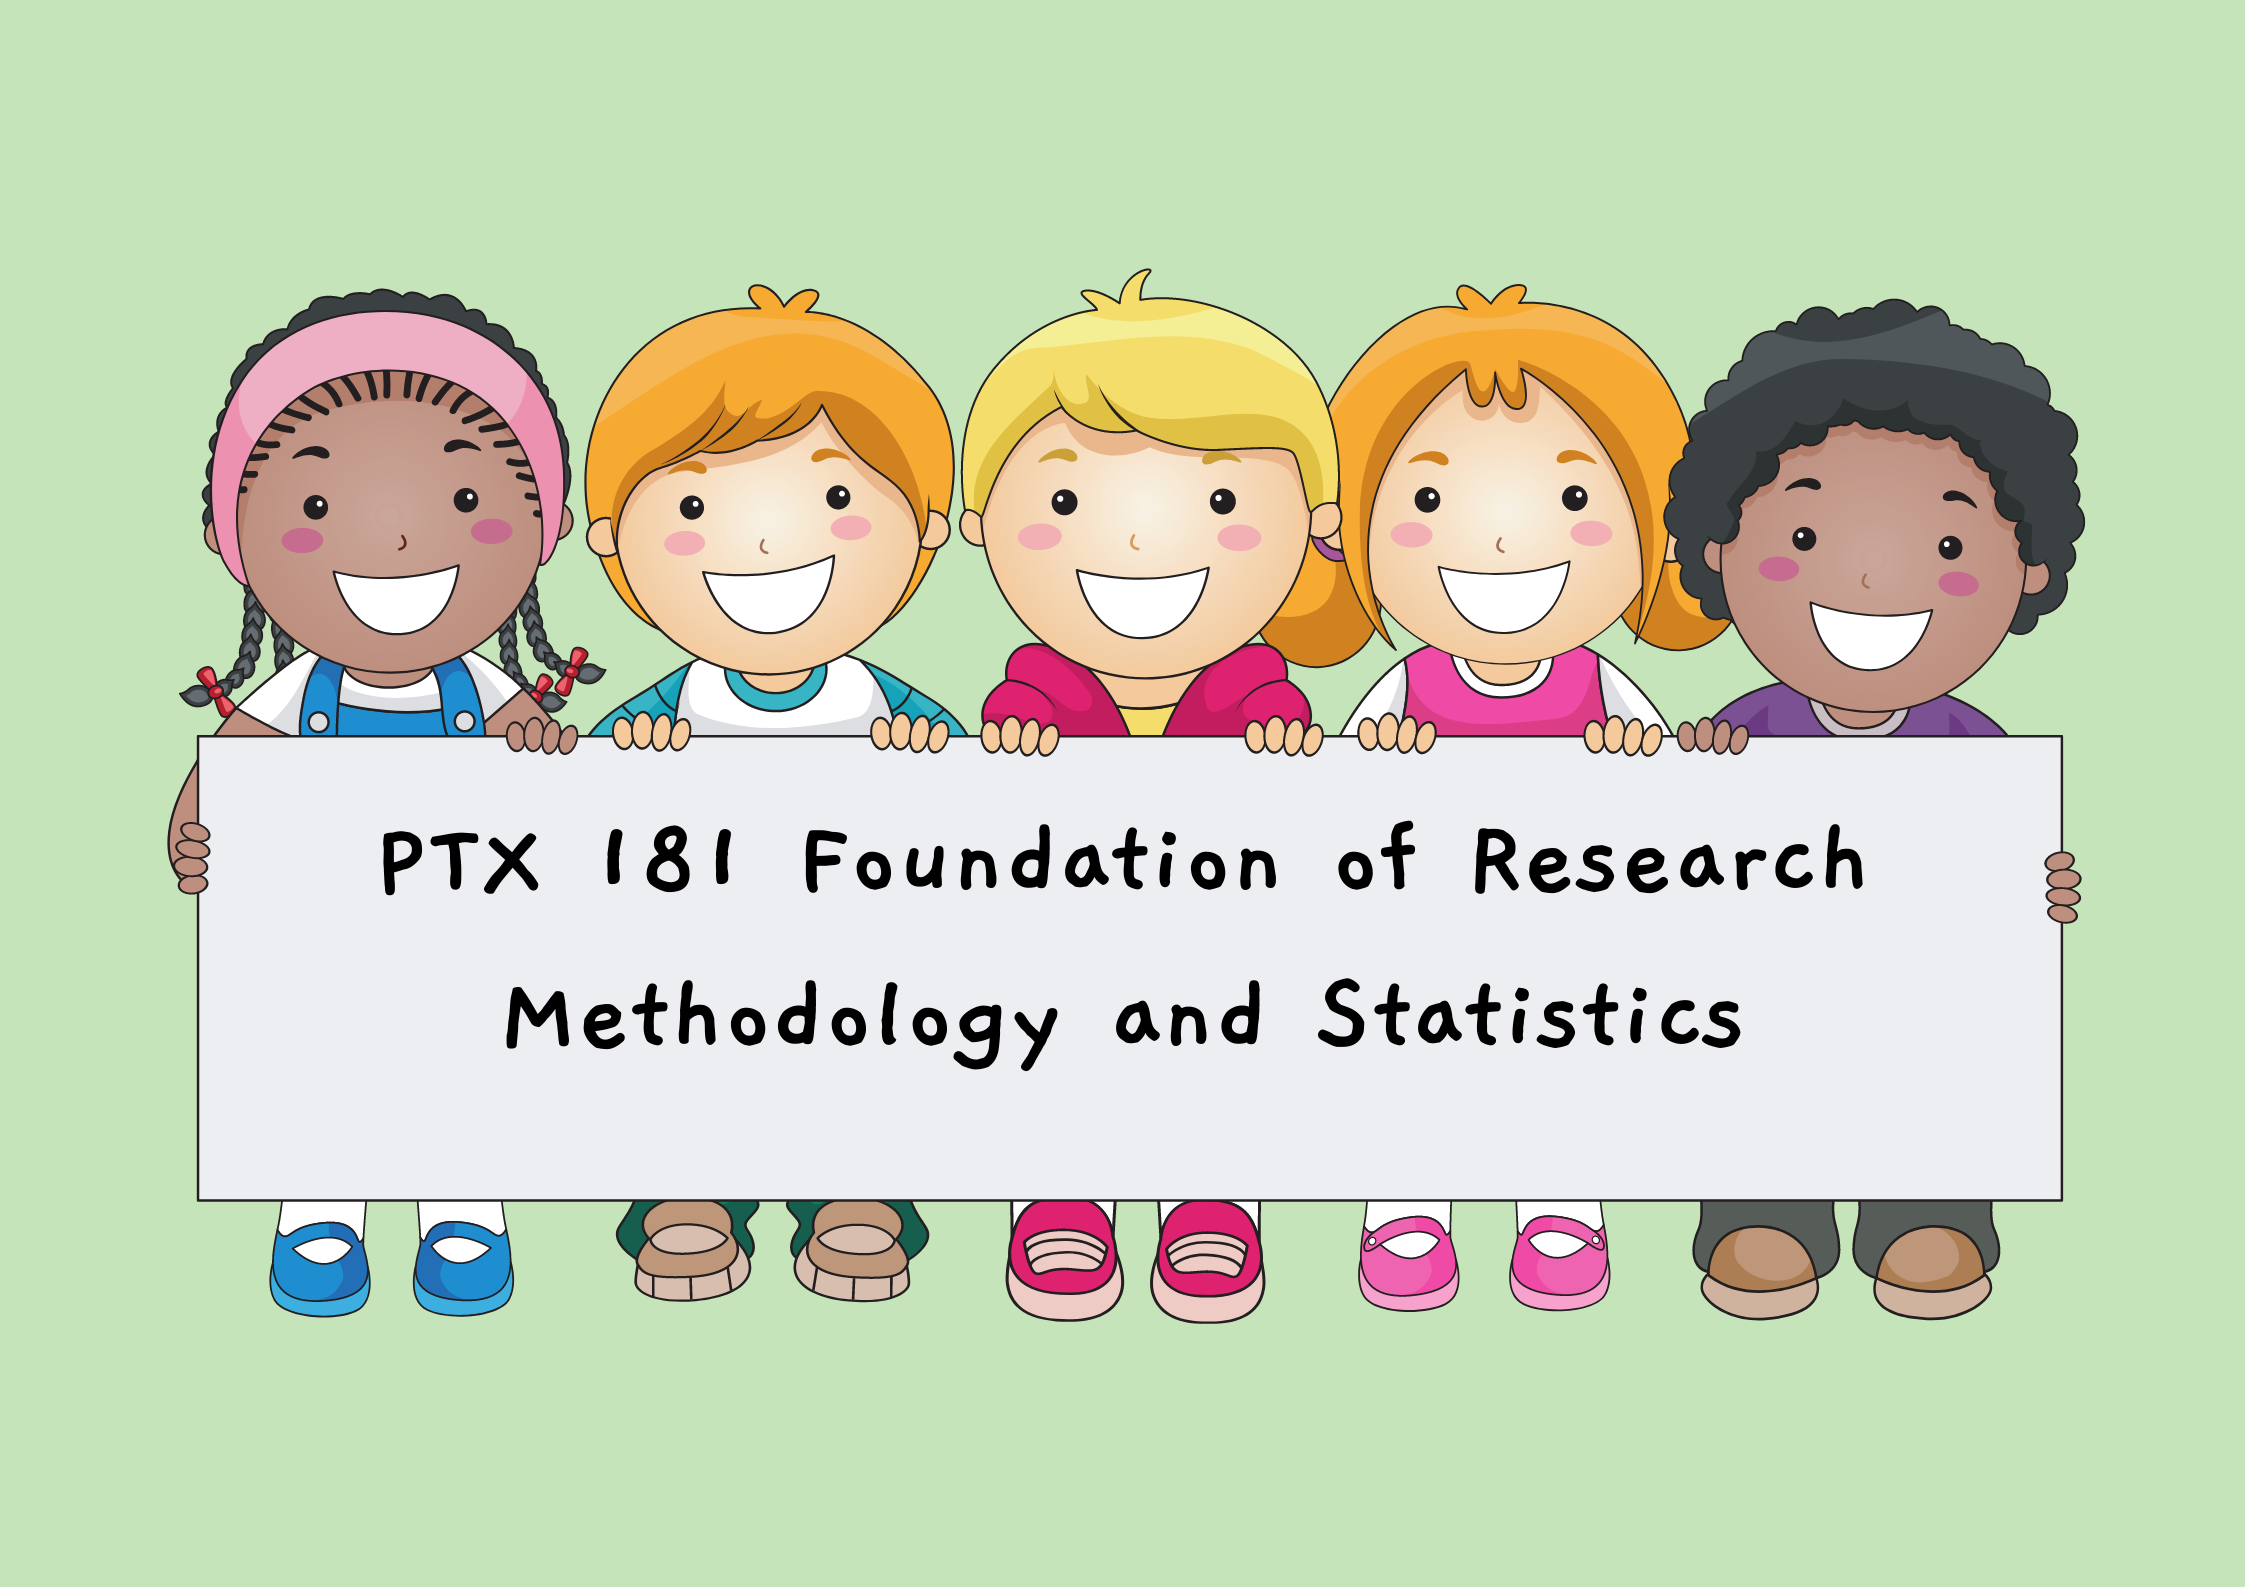 PTX 181 Foundation of Research Methodology and Statistics